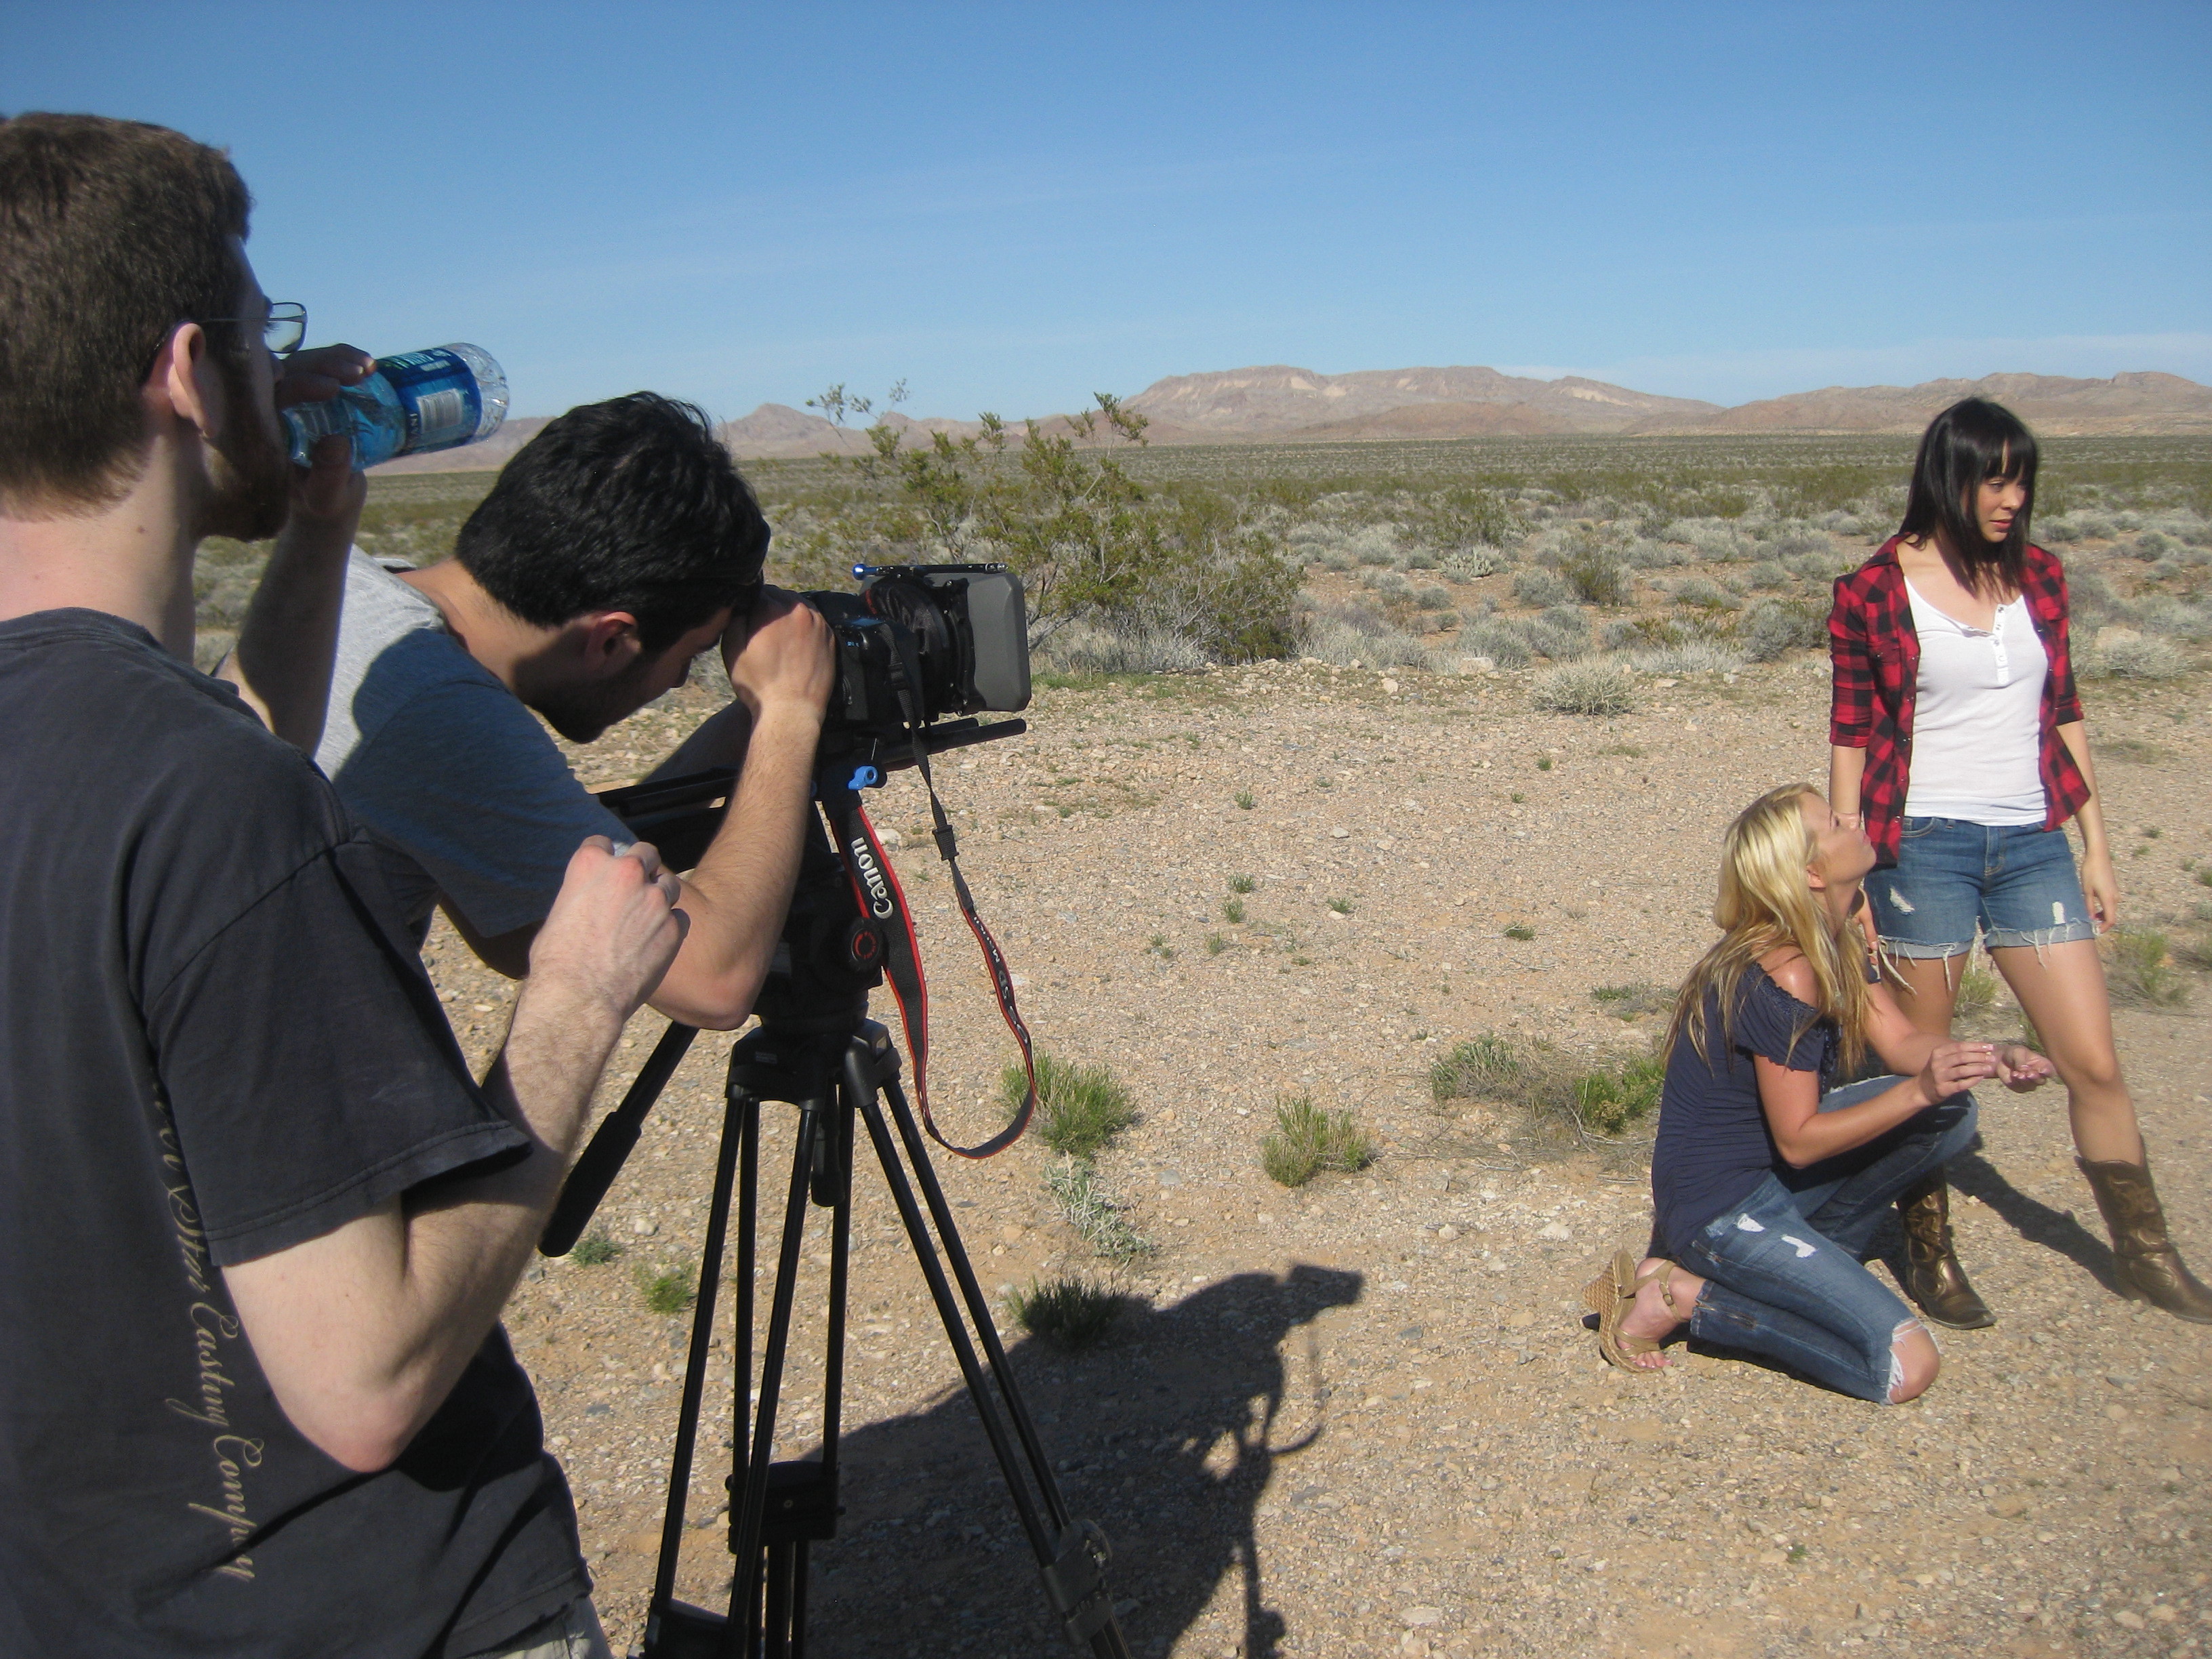 Filming in Valley of Fire with co-star Shanna Perry